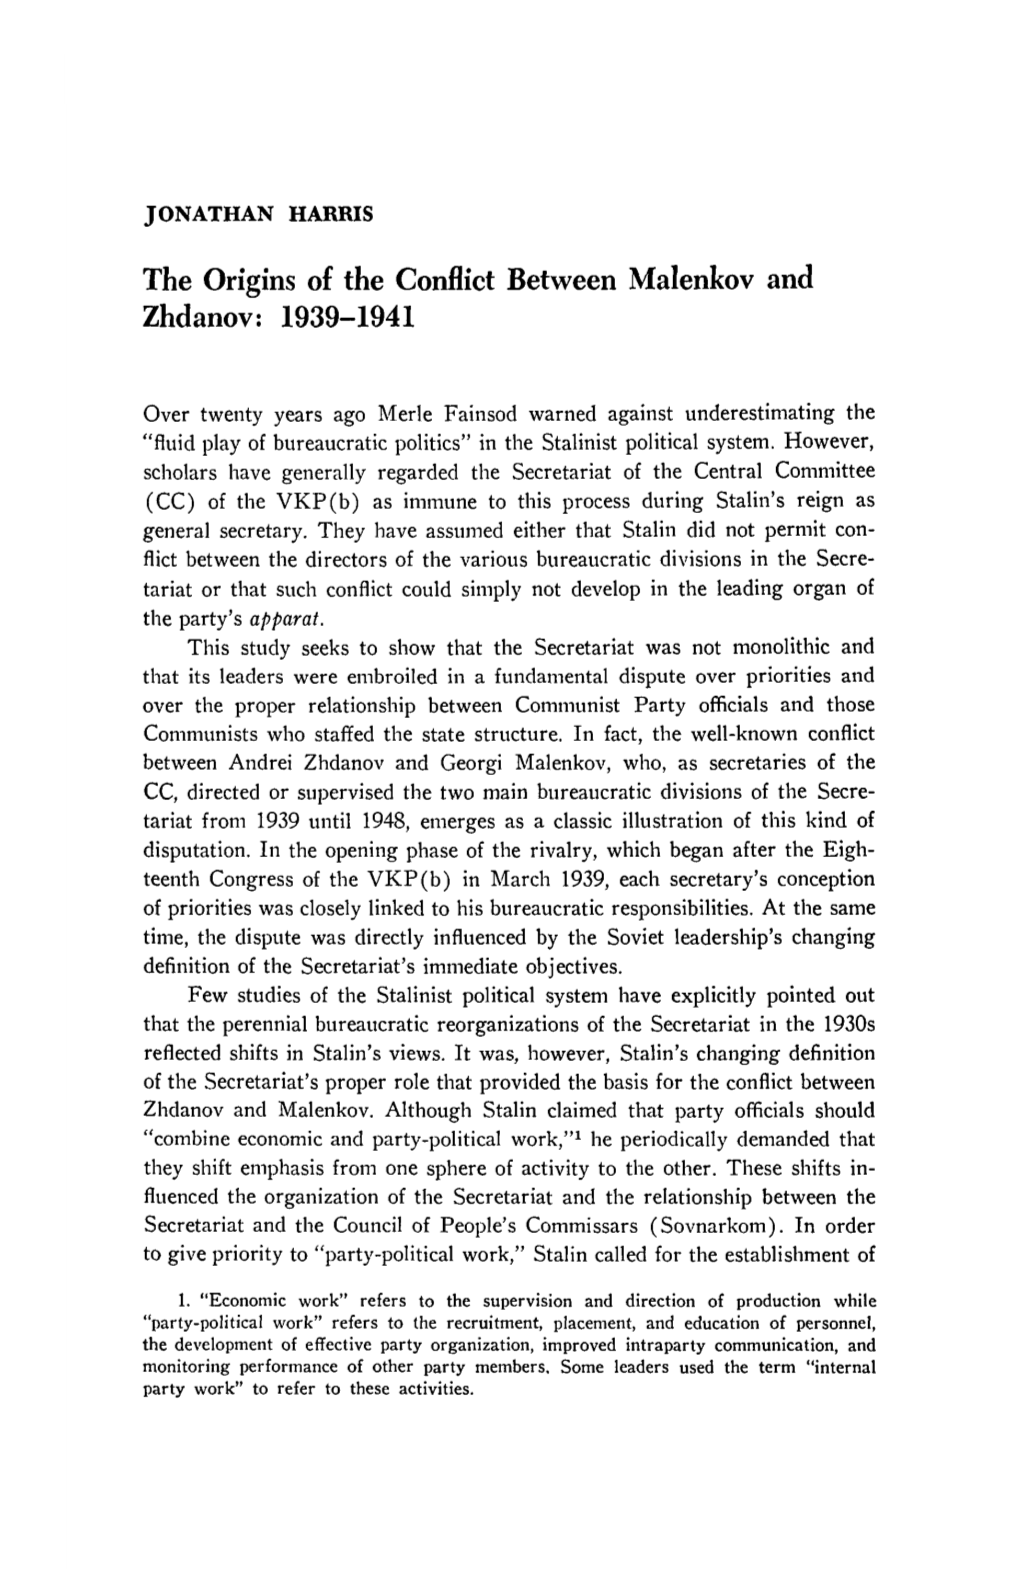 The Origins of the Conflict Between Malenkov and Zhdanov: 1939-1941